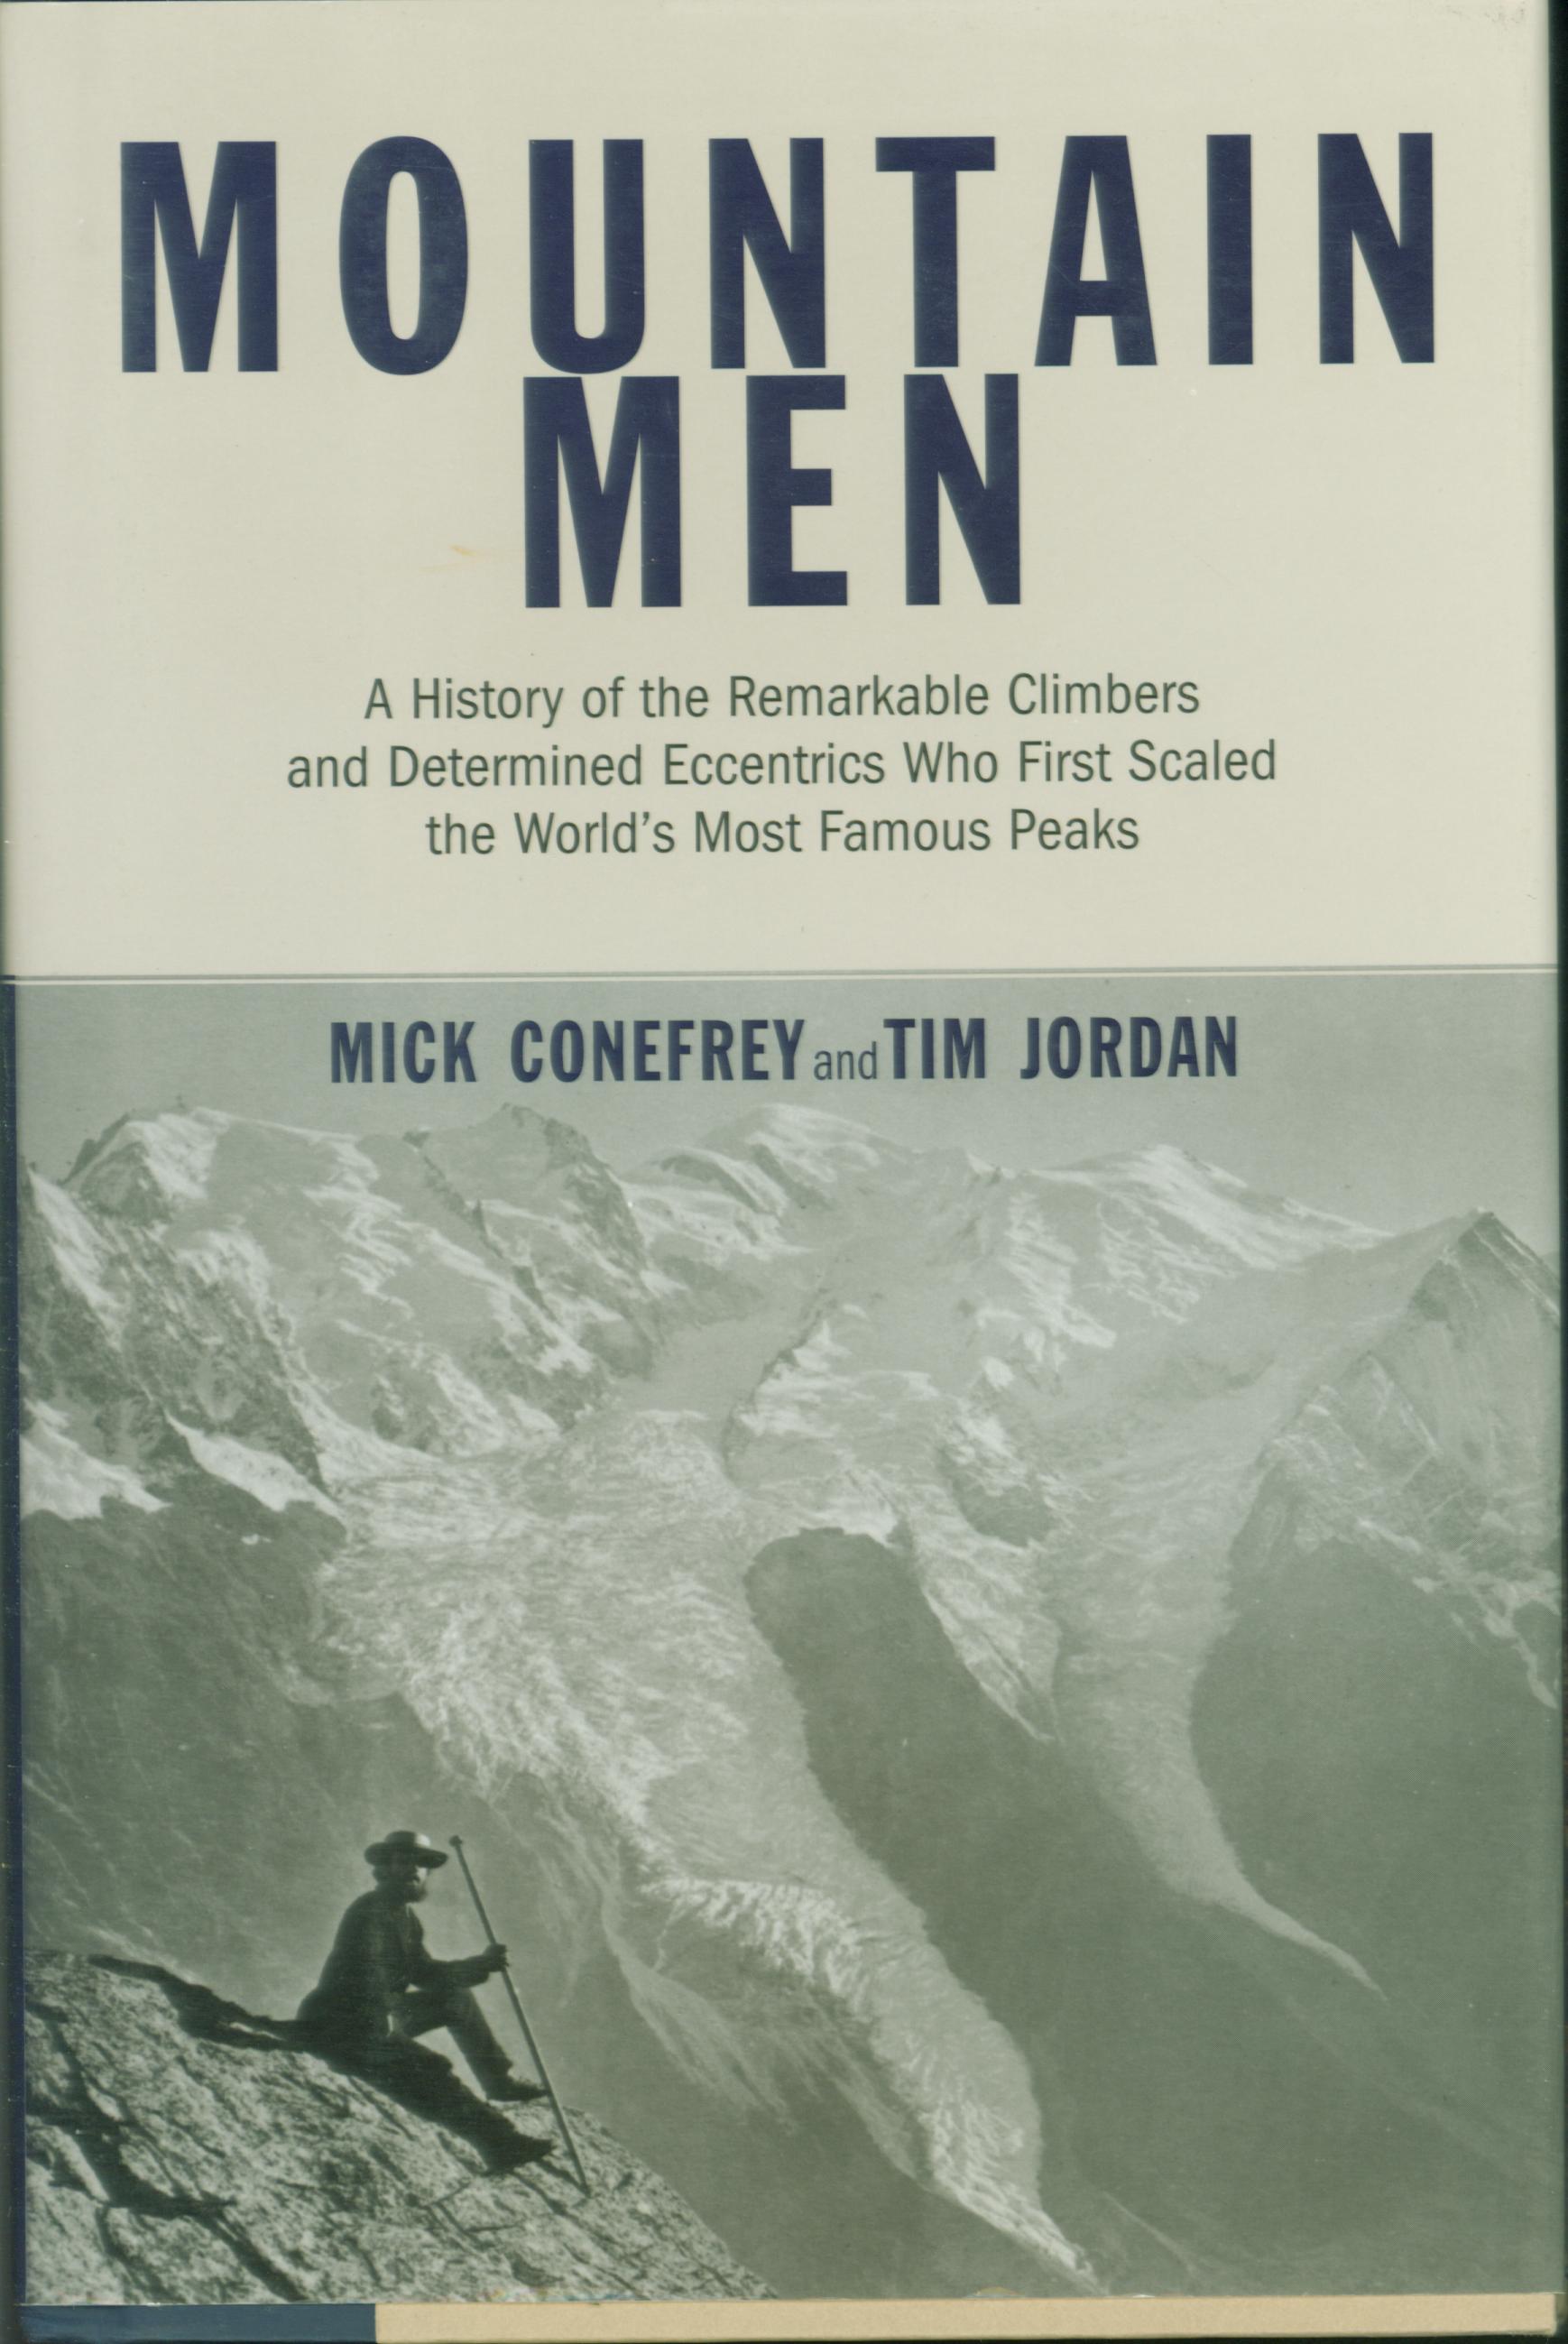 MOUNTAIN MEN: a history of the remarkable climbers and determined eccentrics who first scaled the world's most famous peaks. 